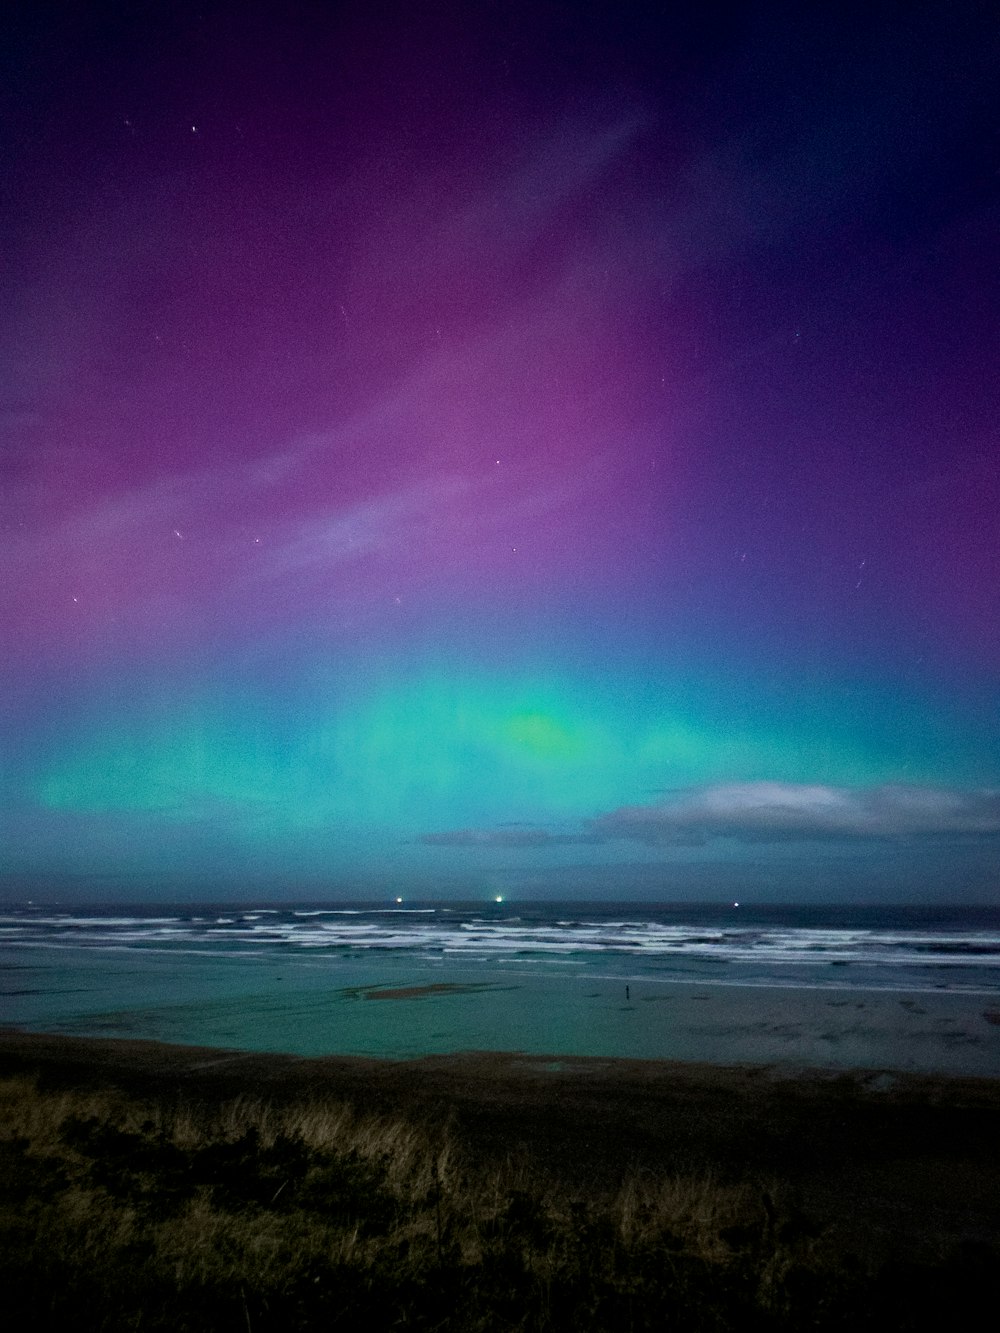 a purple and green aurora bore over a body of water